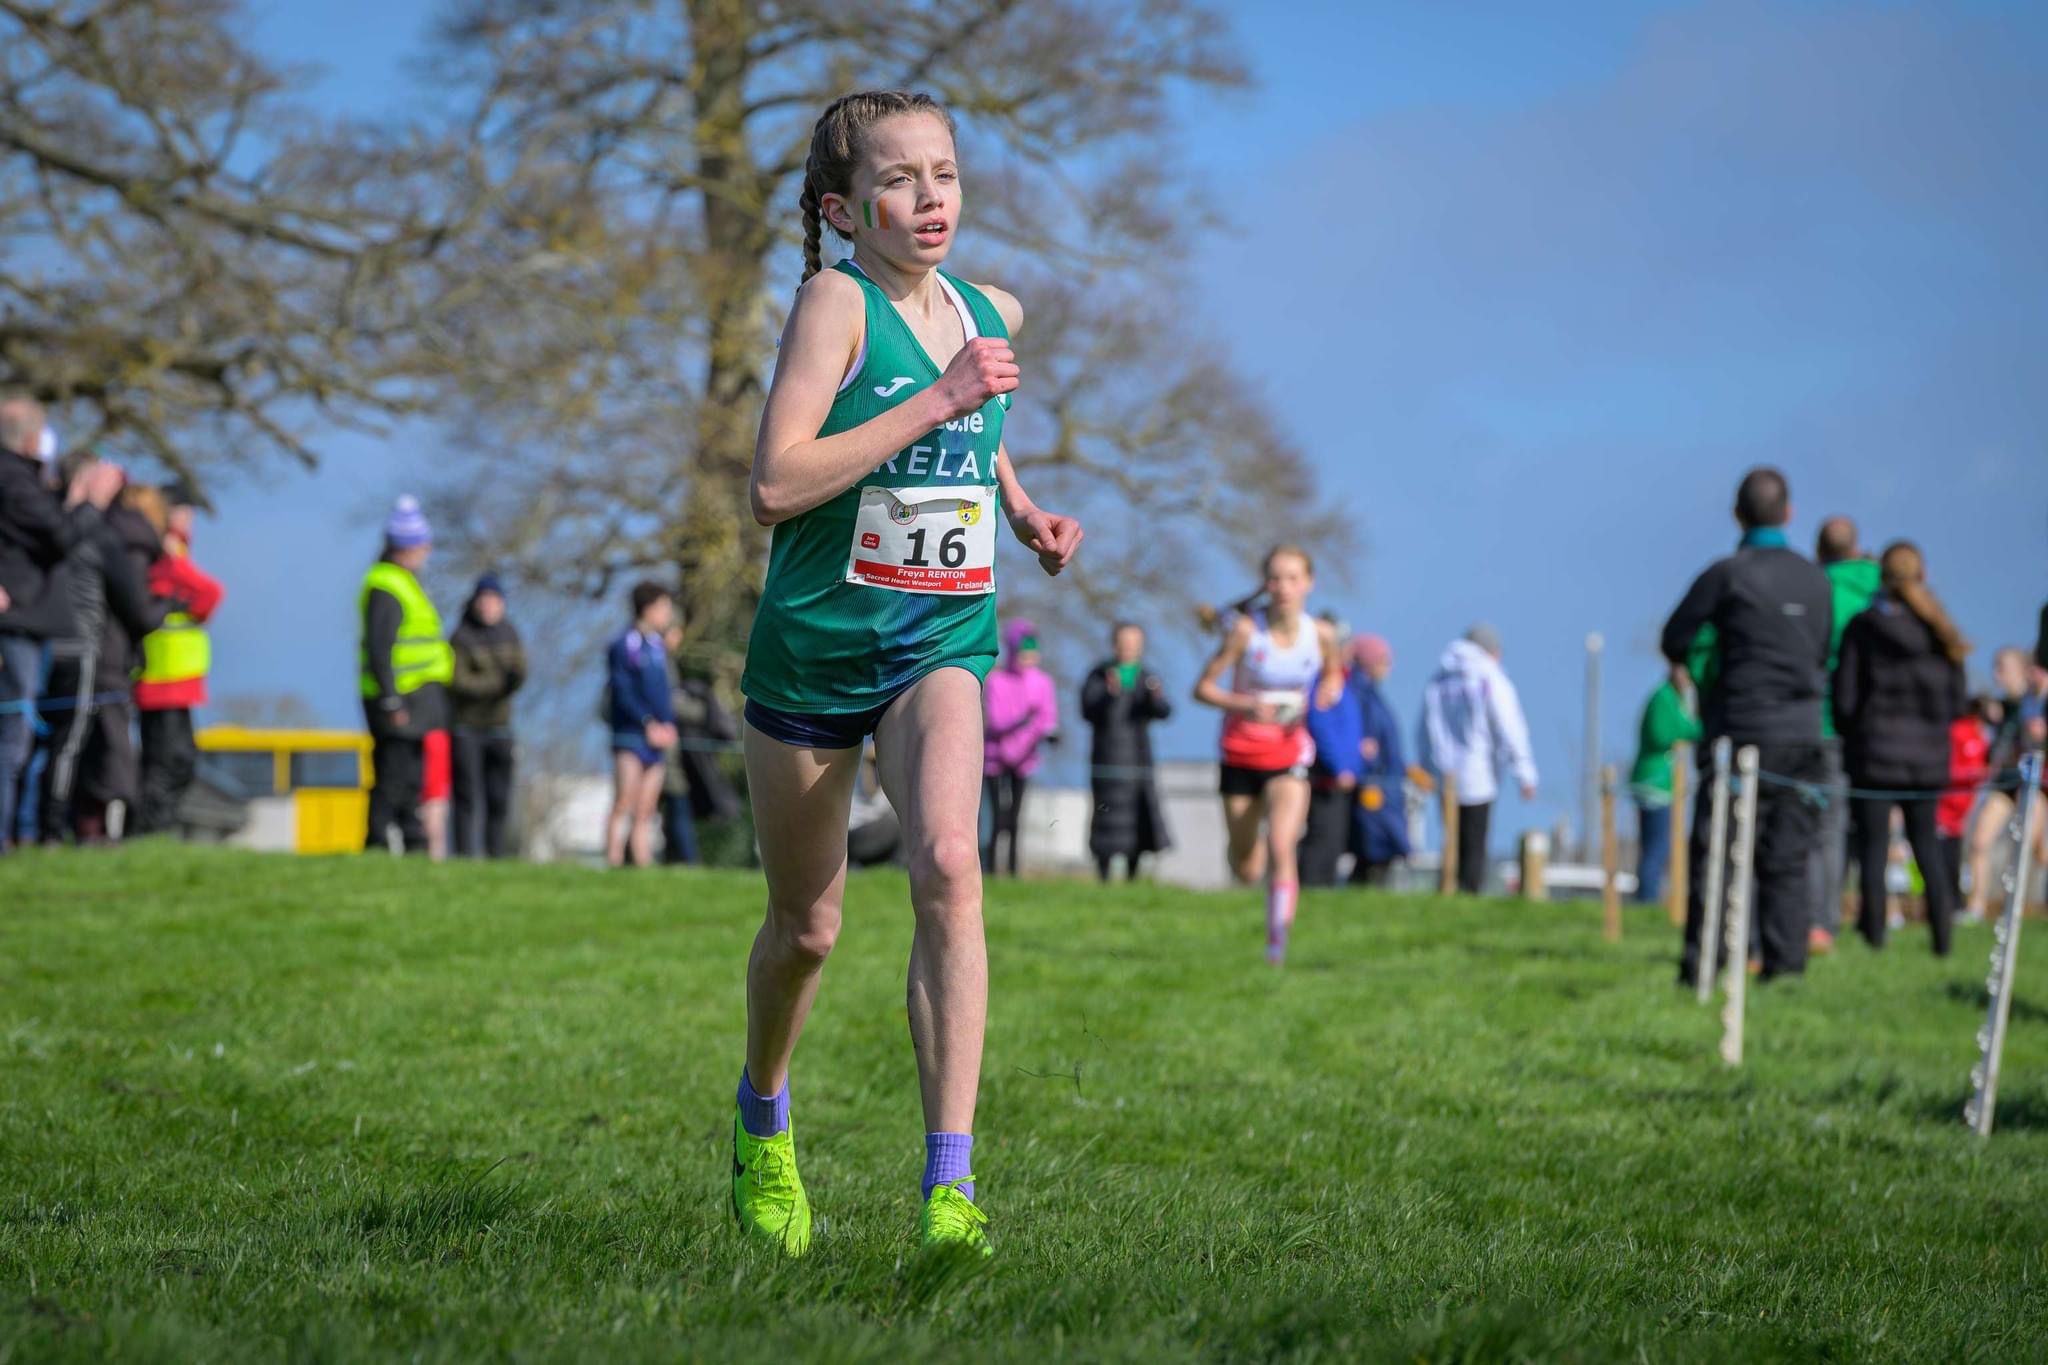 Freya Renton storms to gold in Abbotstown sunshine at SIABs